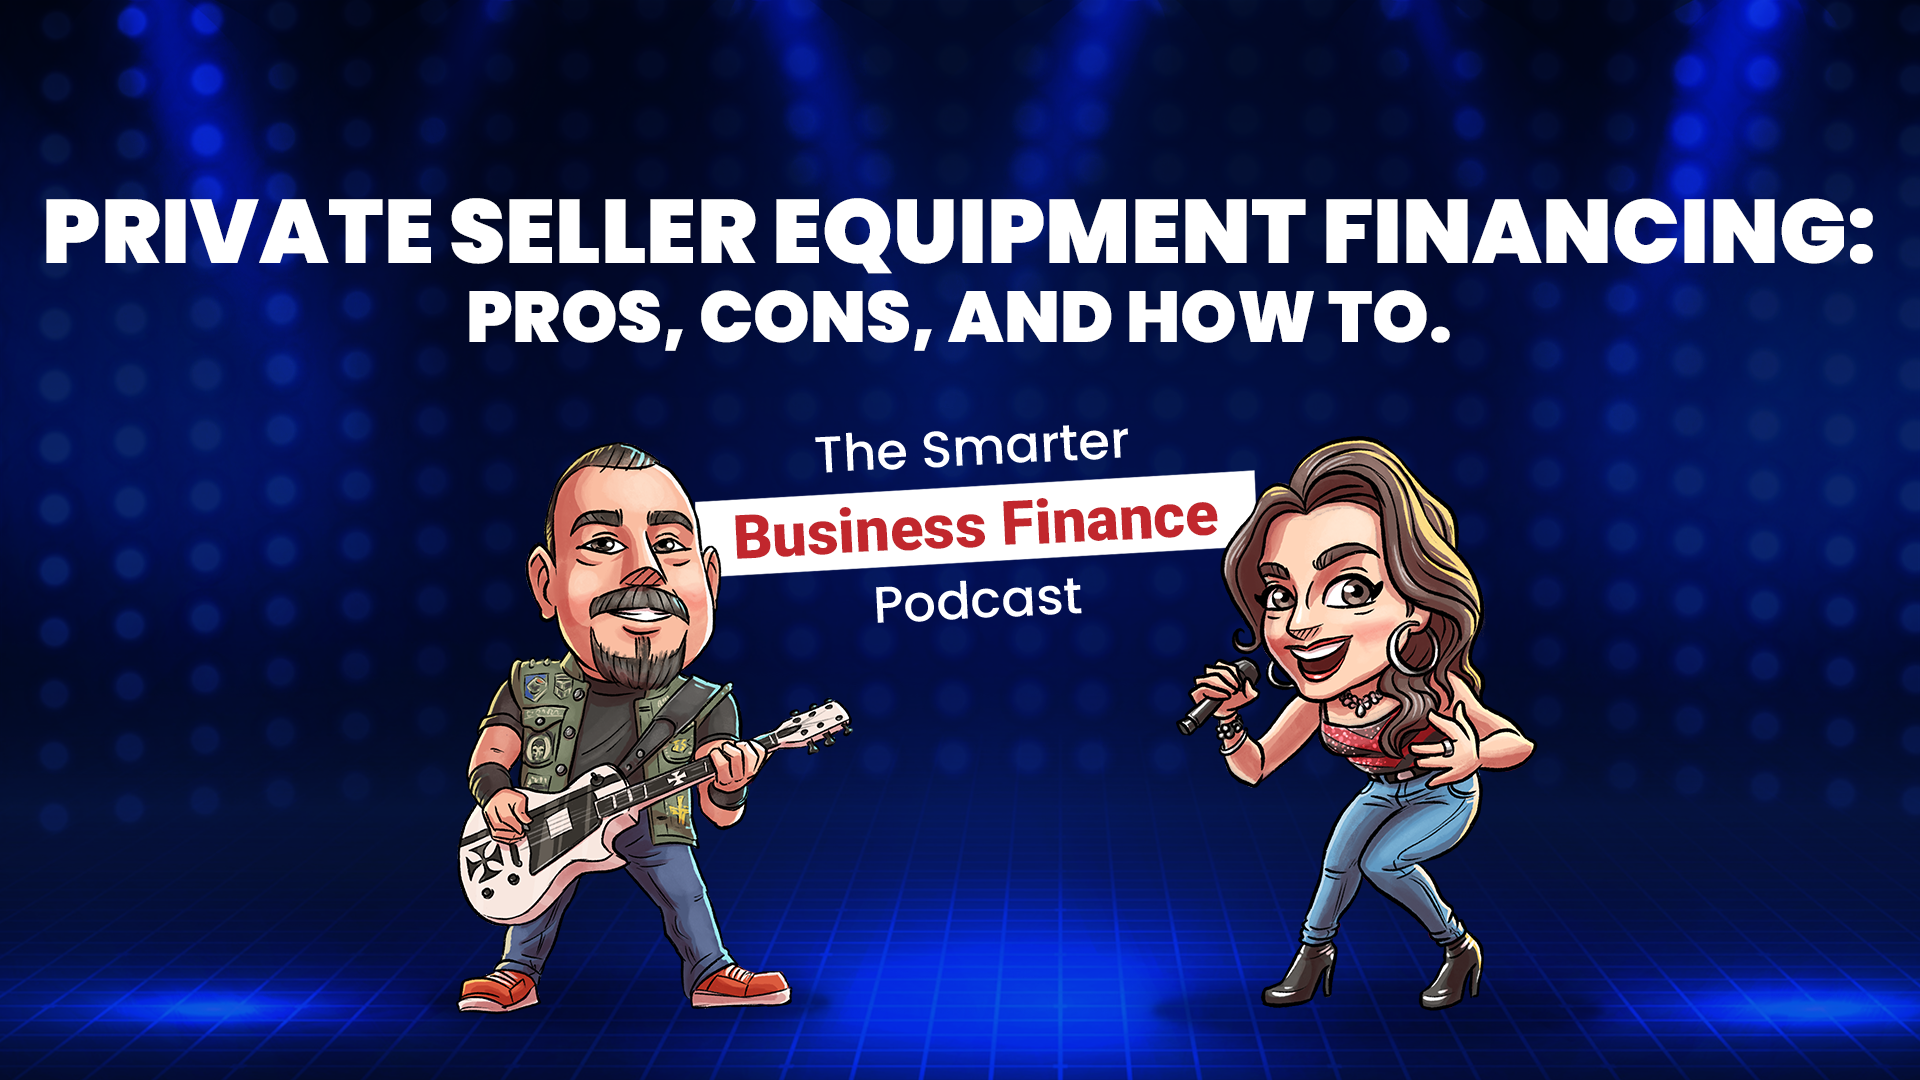 Private Seller Equipment Financing: Pros, Cons and How-To